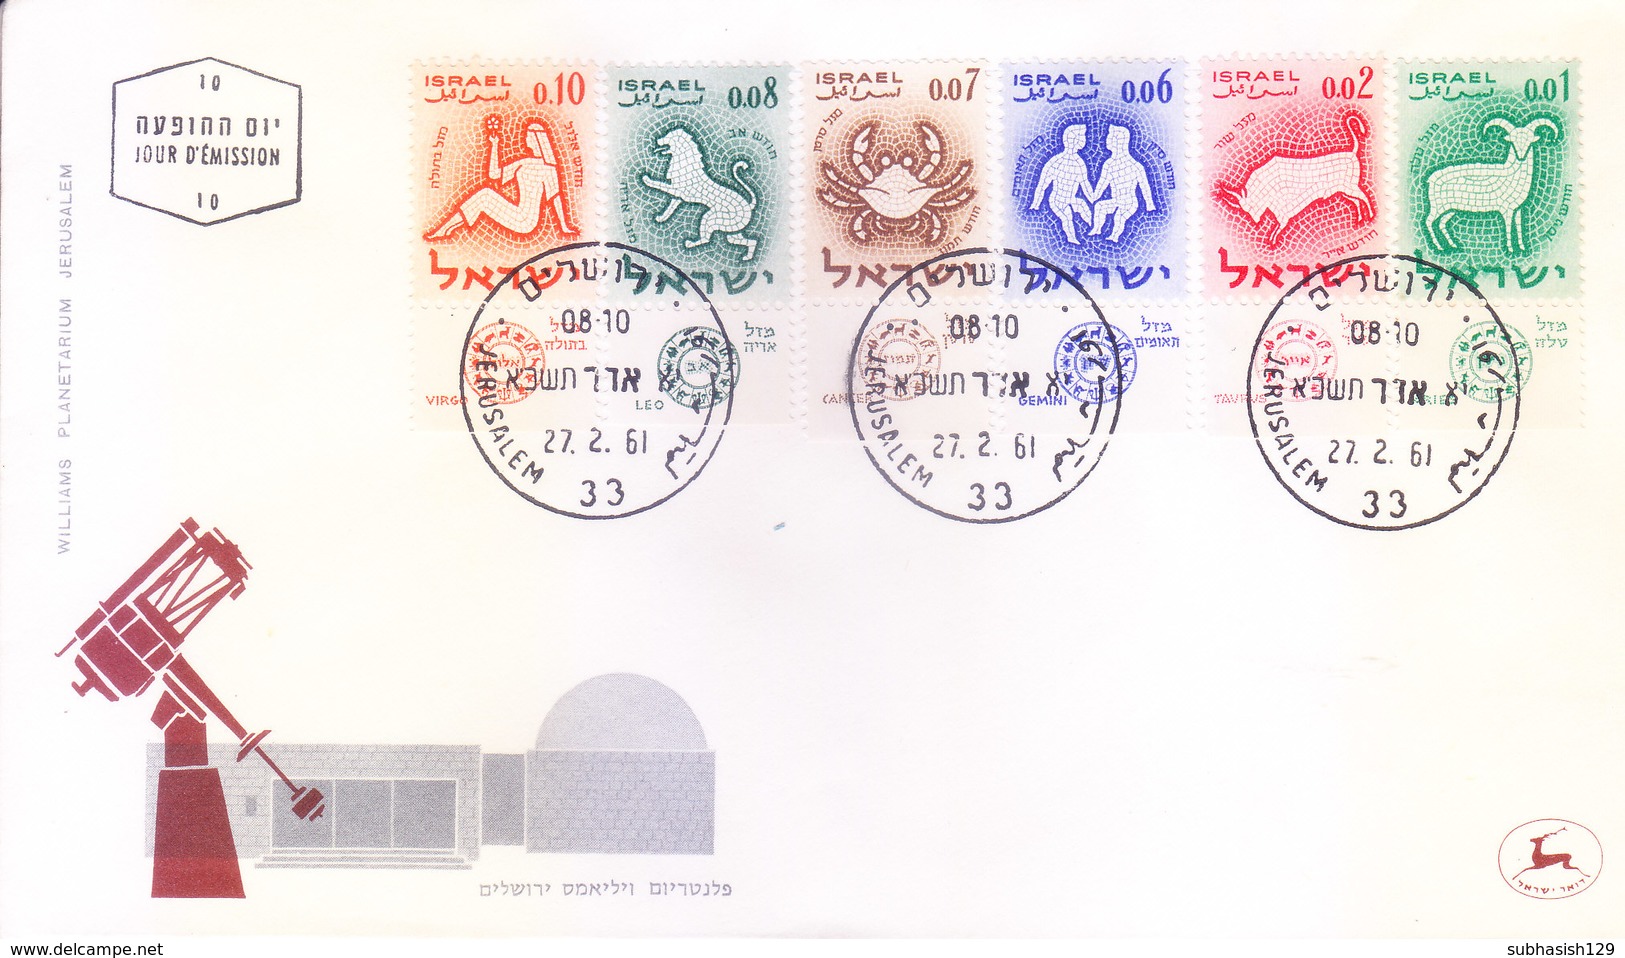 ISRAEL : FIRST DAY COVER : 27-02-1961 : ISSUED FROM JERUSALEM : WILLIAM PLANETARIUM : USE OF TAB STAMPS : 6v COMPLETE - Lettres & Documents